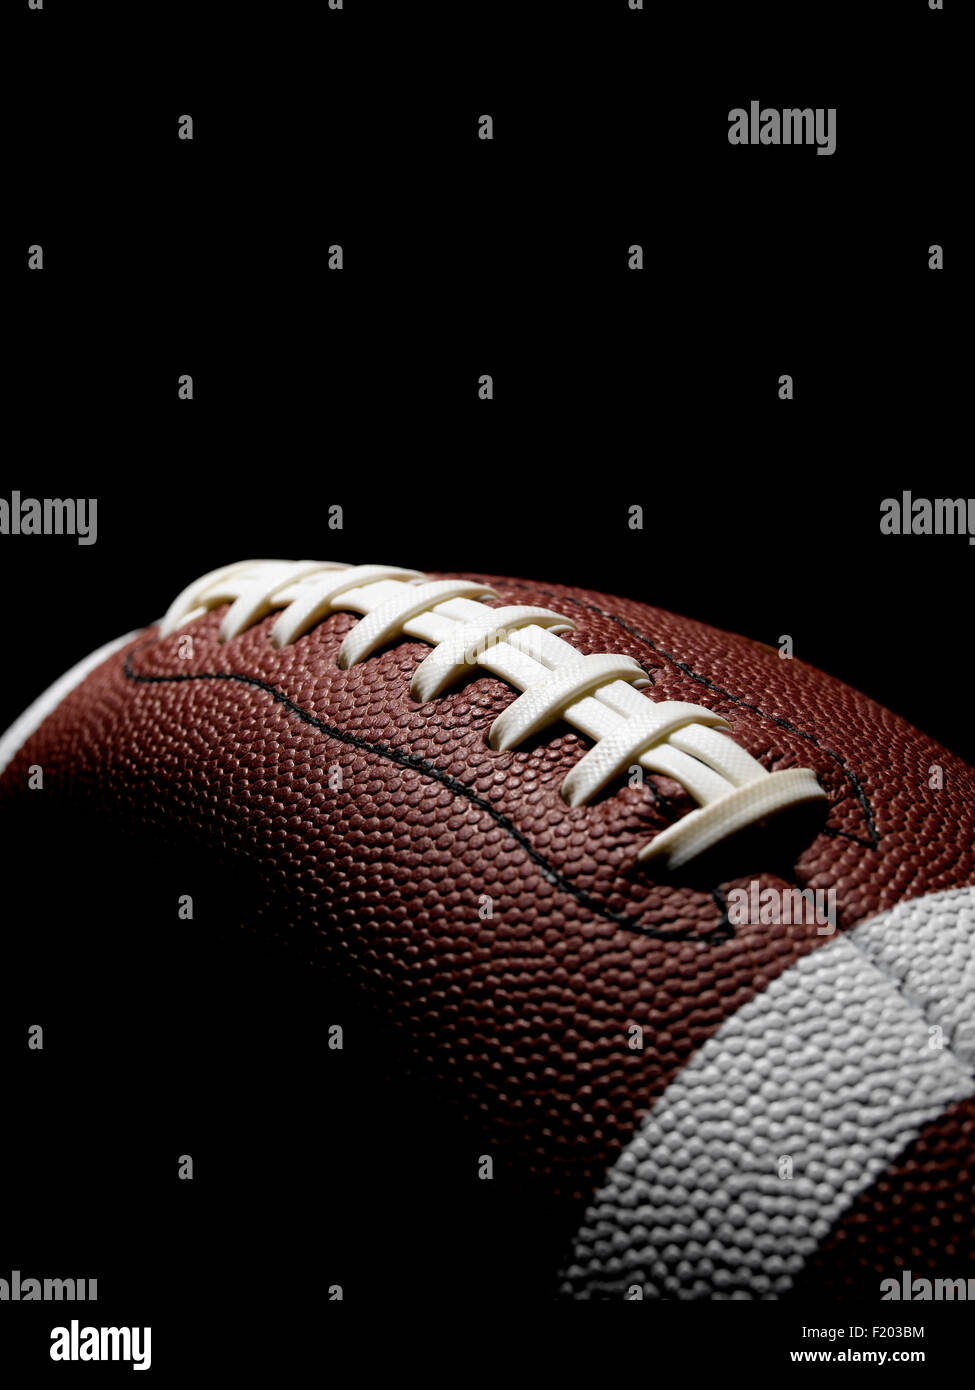 Isolated American football in a black background Stock Photo